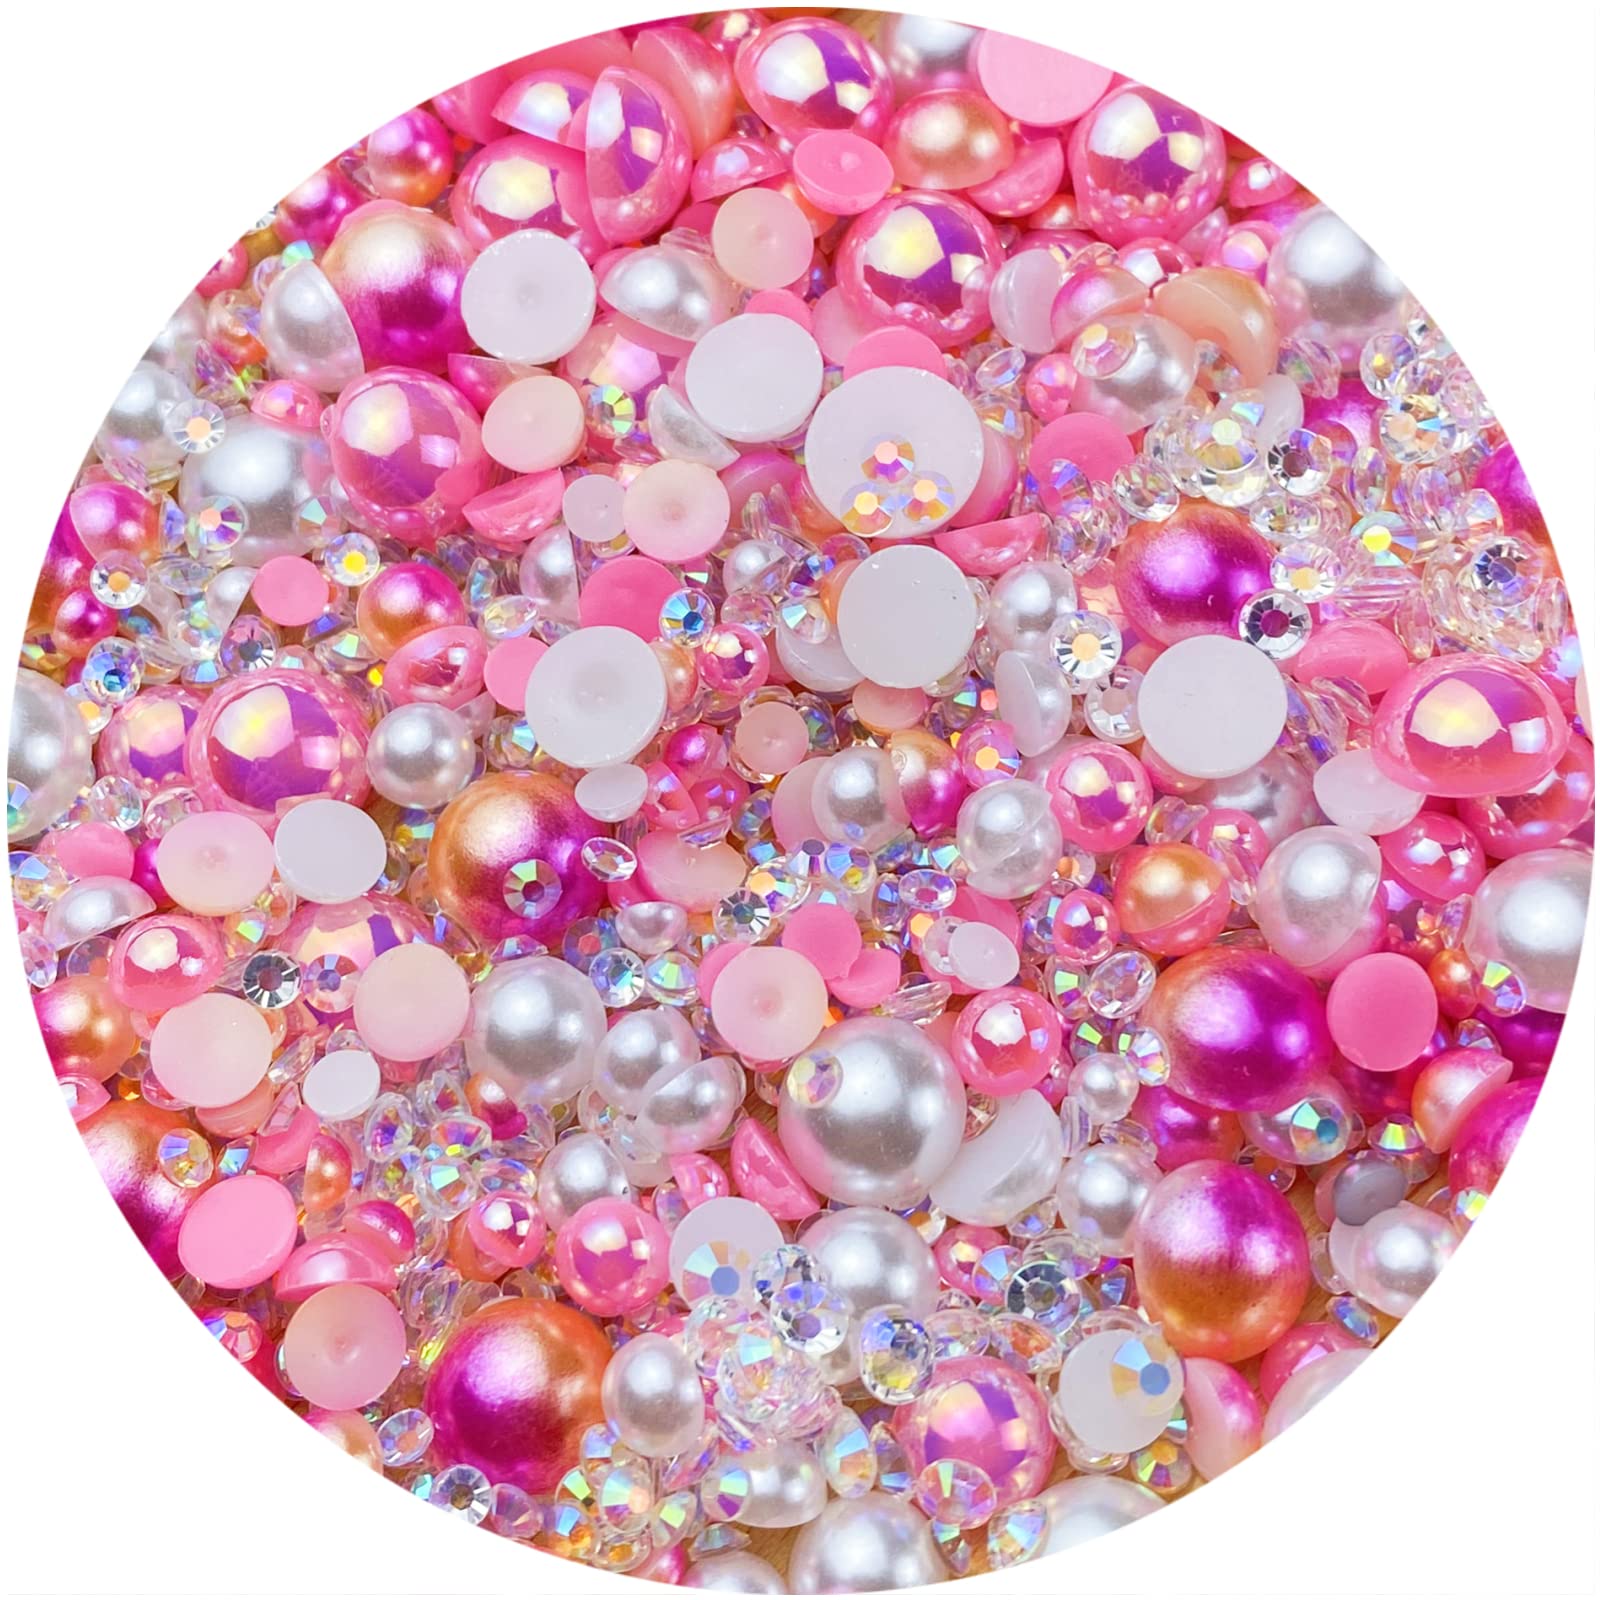 Towenm 60g Mix Pearls and Rhinestones for Crafts, 2mm-10mm Pink Pearl  Rhinestones for Shoes Nails Face Art, Tumbler Bedazzling Half Pearls and